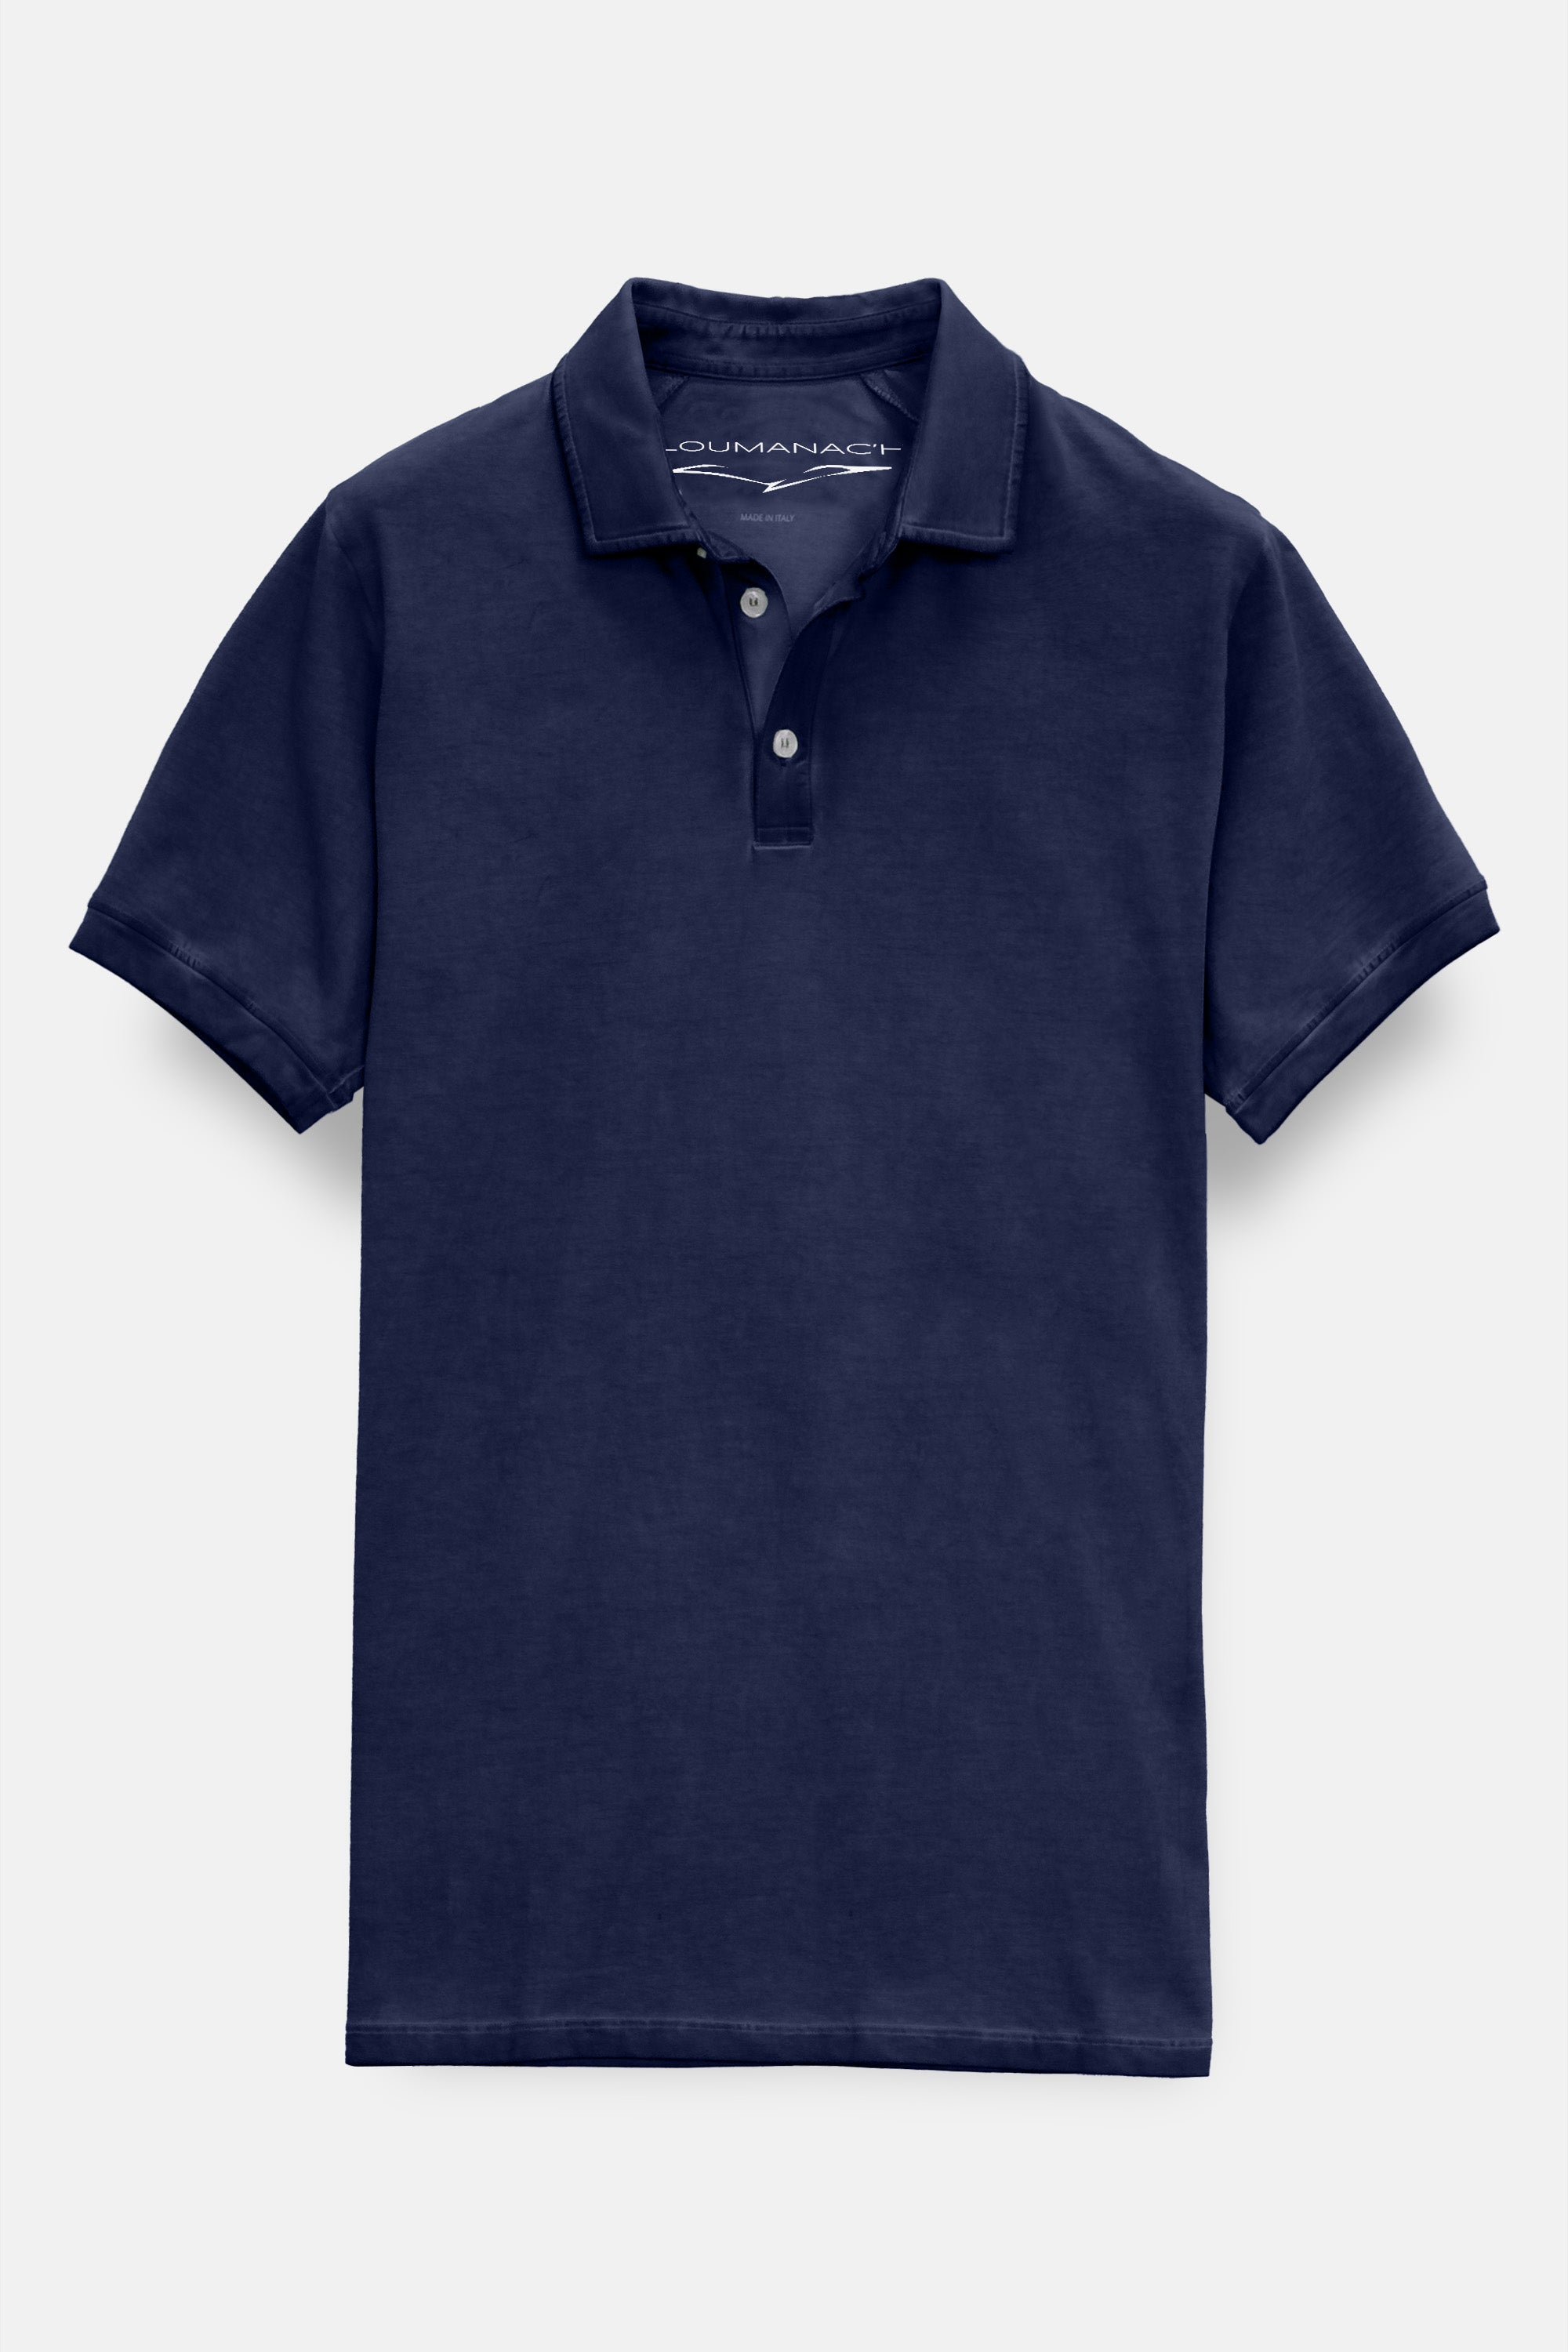 Performance Polo in Navy